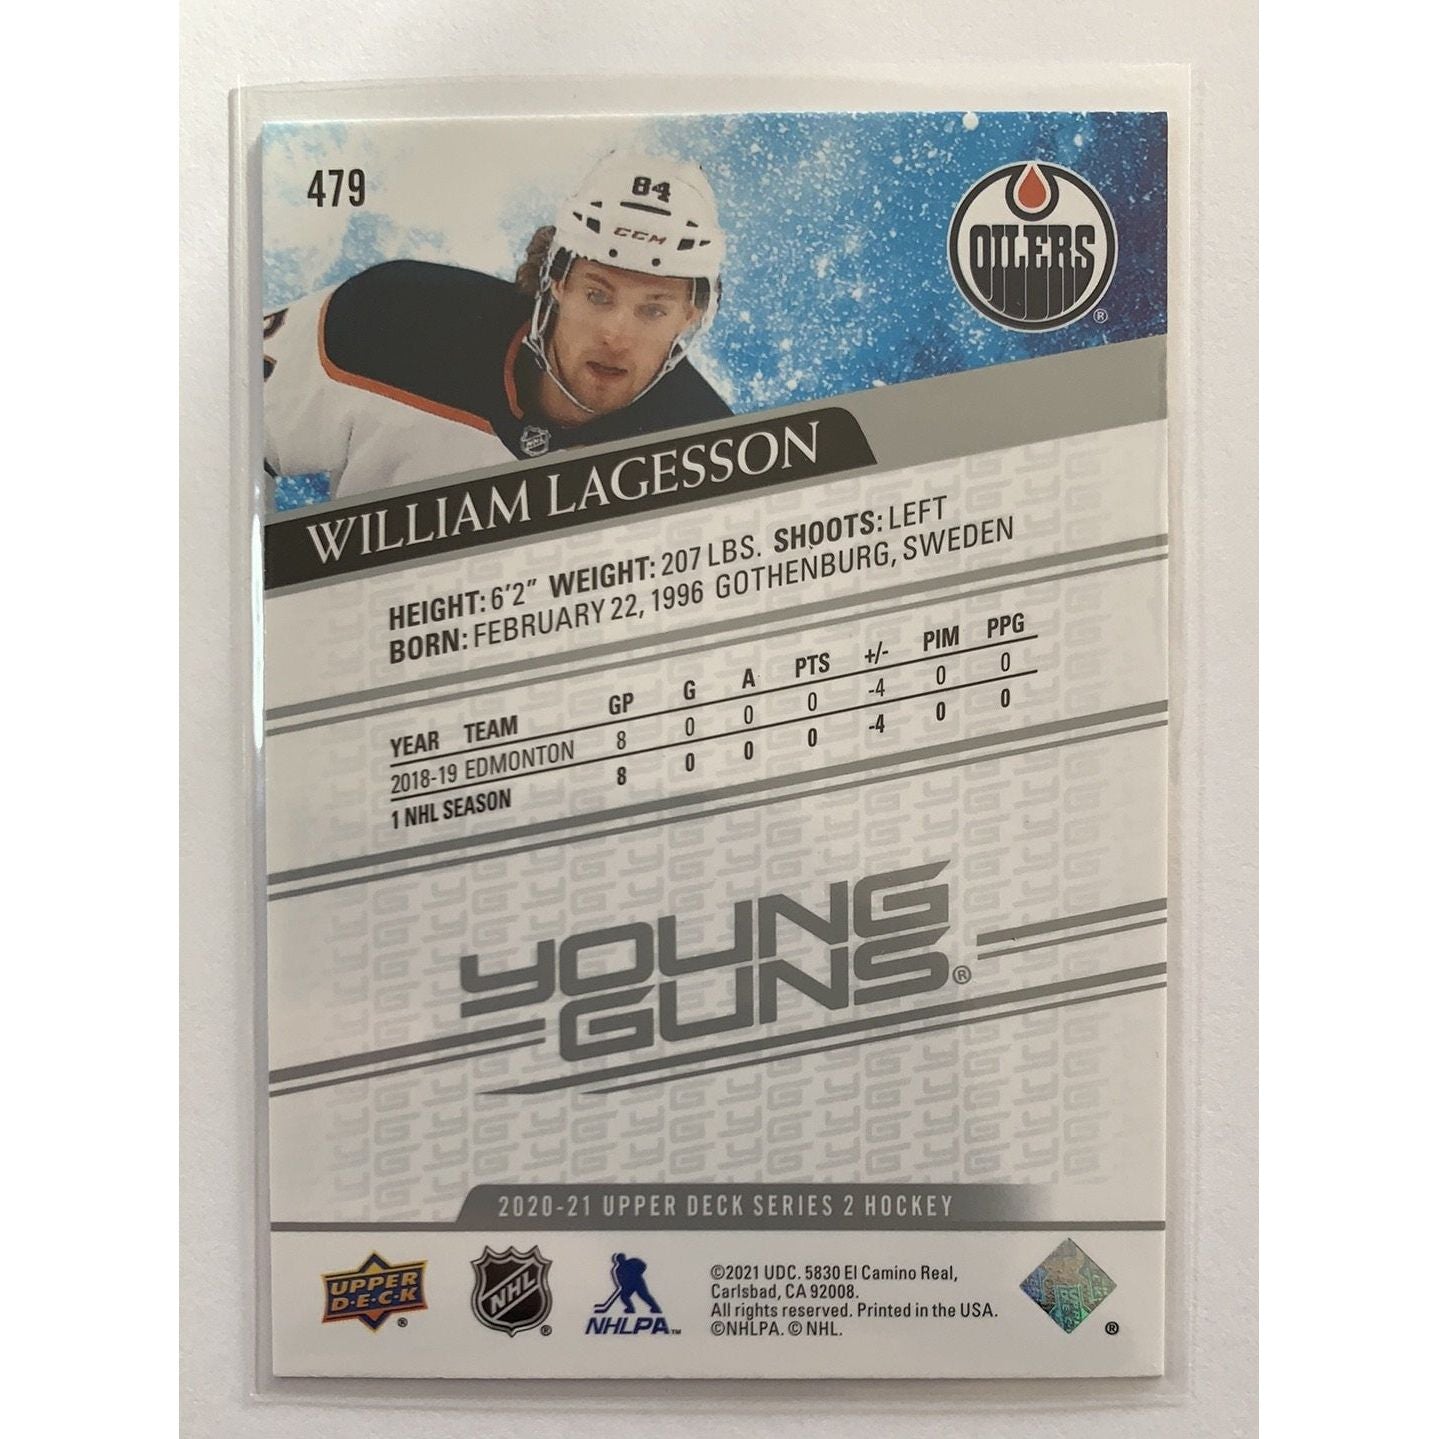  2020-21 Upper Deck Series 2 William Lagesson Young Guns  Local Legends Cards & Collectibles